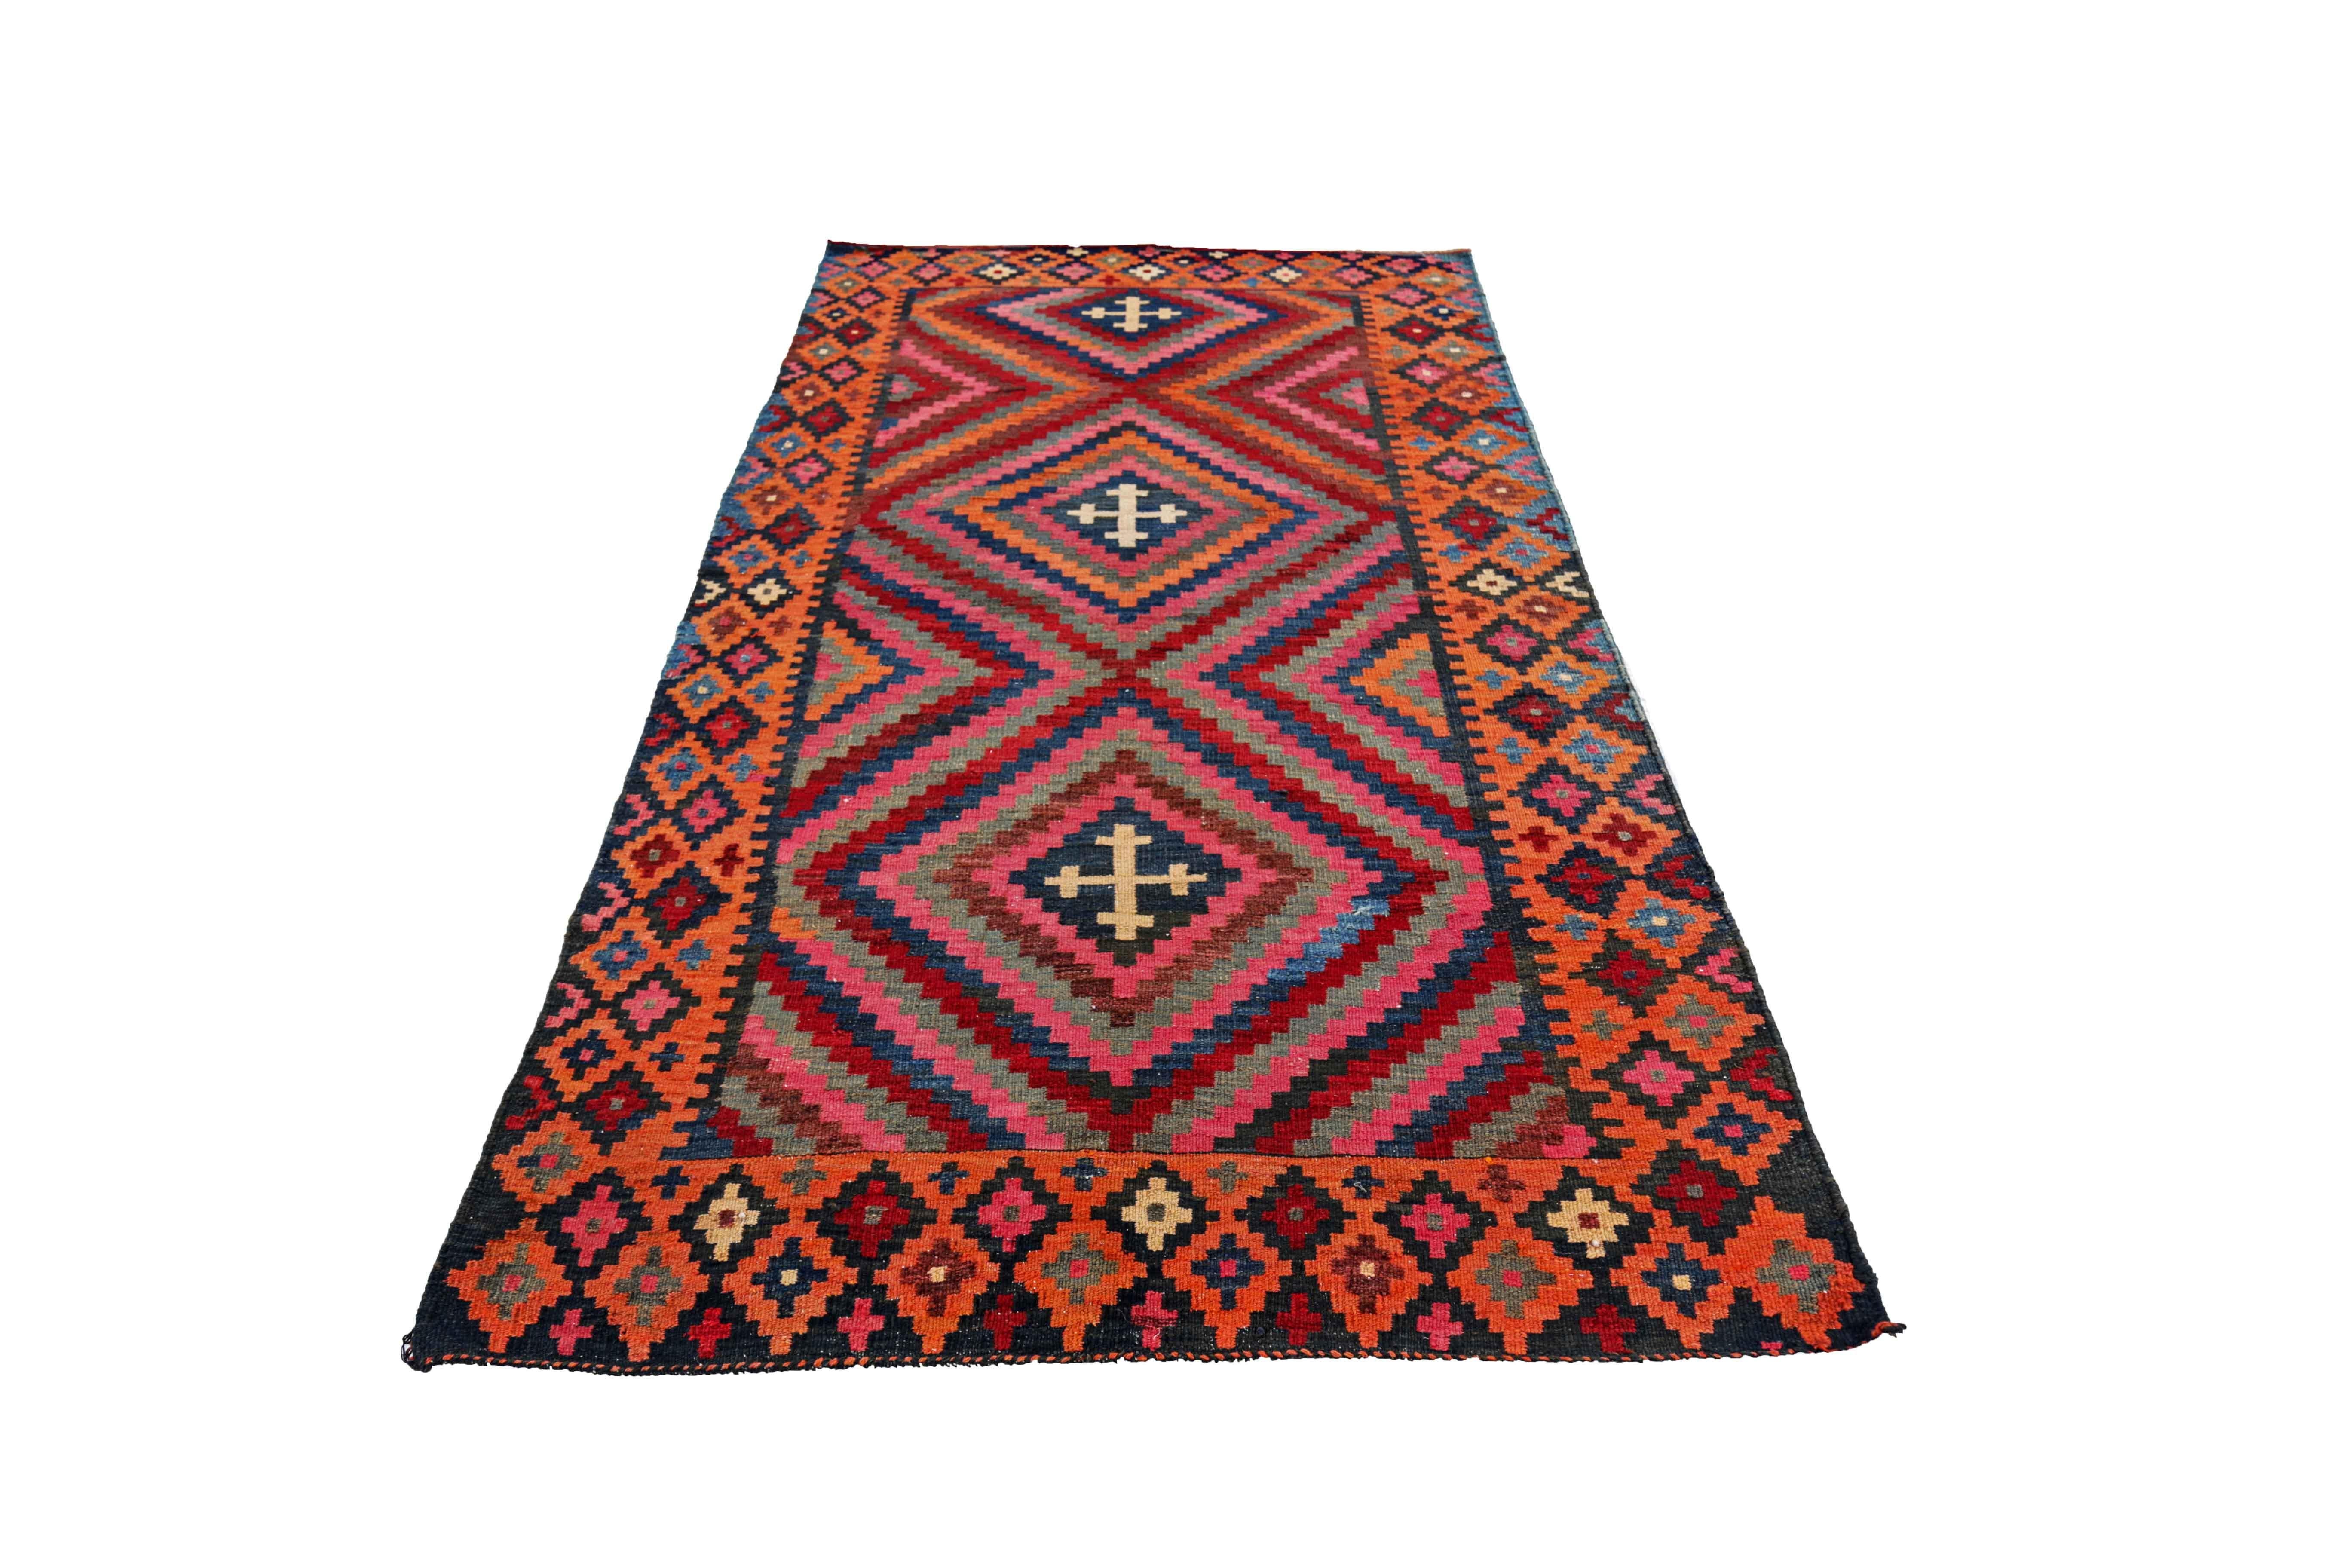 Antique Persian area rug handwoven from the finest sheep’s wool. It’s colored with all-natural vegetable dyes that are safe for humans and pets. It’s a traditional Kilim design handwoven by expert artisans. It’s a lovely area rug that can be